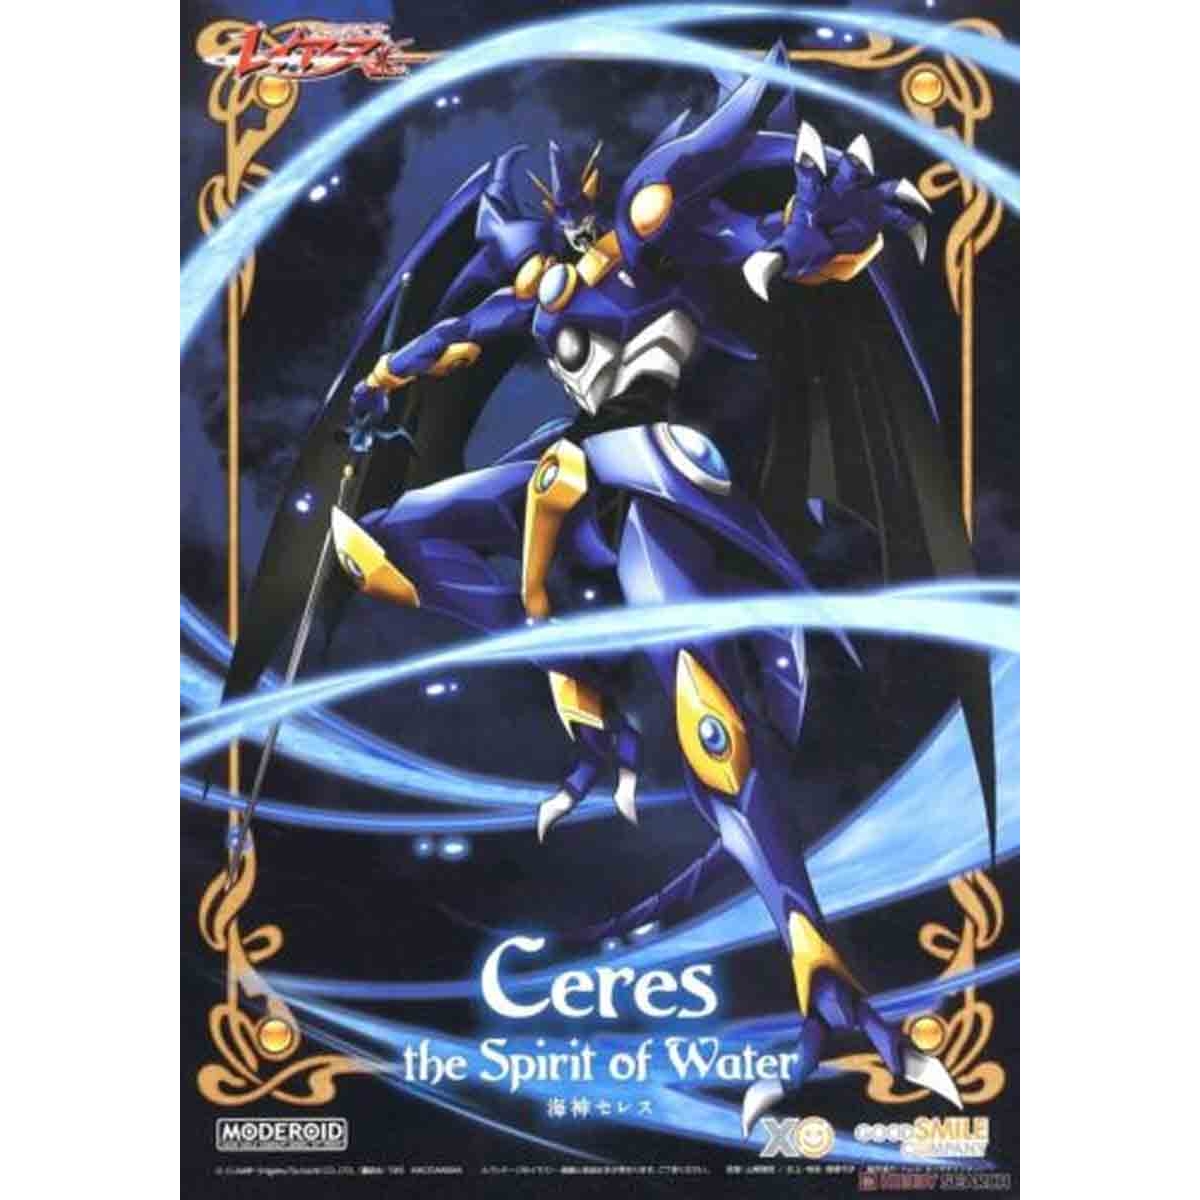 Ceres the Spirit of Water...